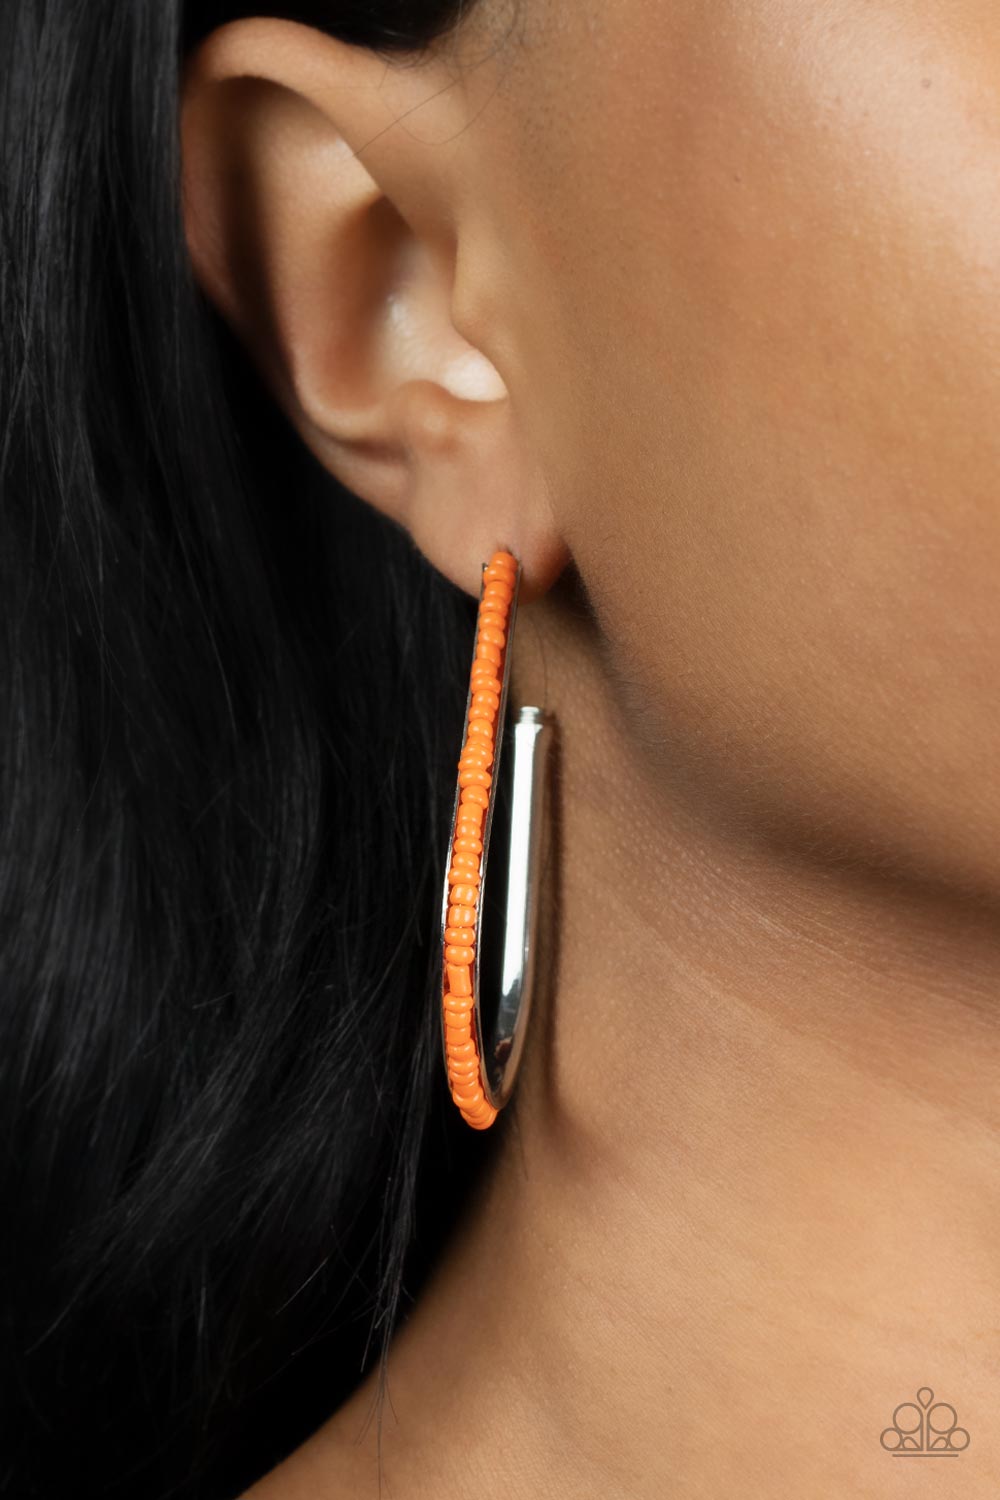 Beaded Bauble Orange Hoop Earring - Paparazzi Accessories  A dainty collection of orange seed beads embellish the beveled spine of a silver hook shaped hoop, creating a trendy pop of color. Hoop measures approximately 1 1/2" in diameter. Earring attaches to a standard post fitting.  Sold as one pair of hoop earrings.